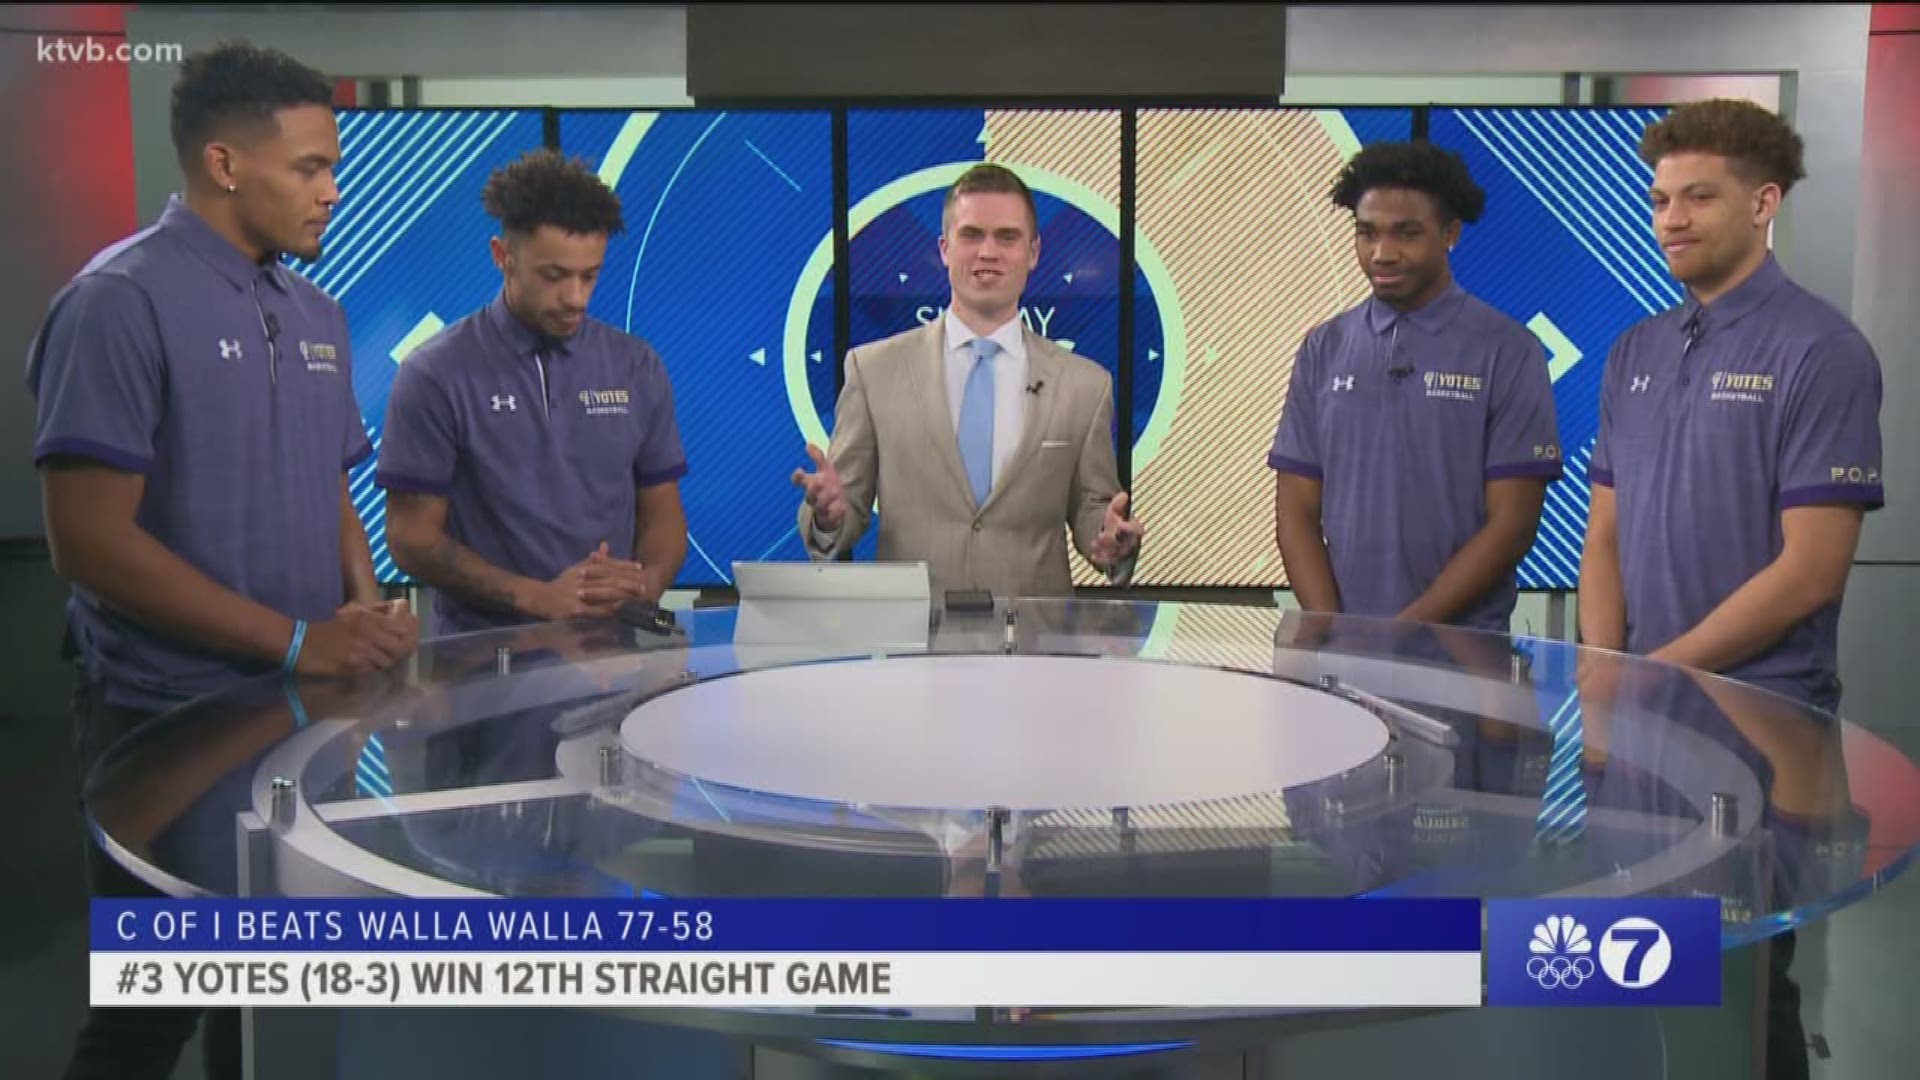 Members of the College of Idaho men's basketball team joined Will Hall on set of Sunday Sports Extra January 19, 2020.